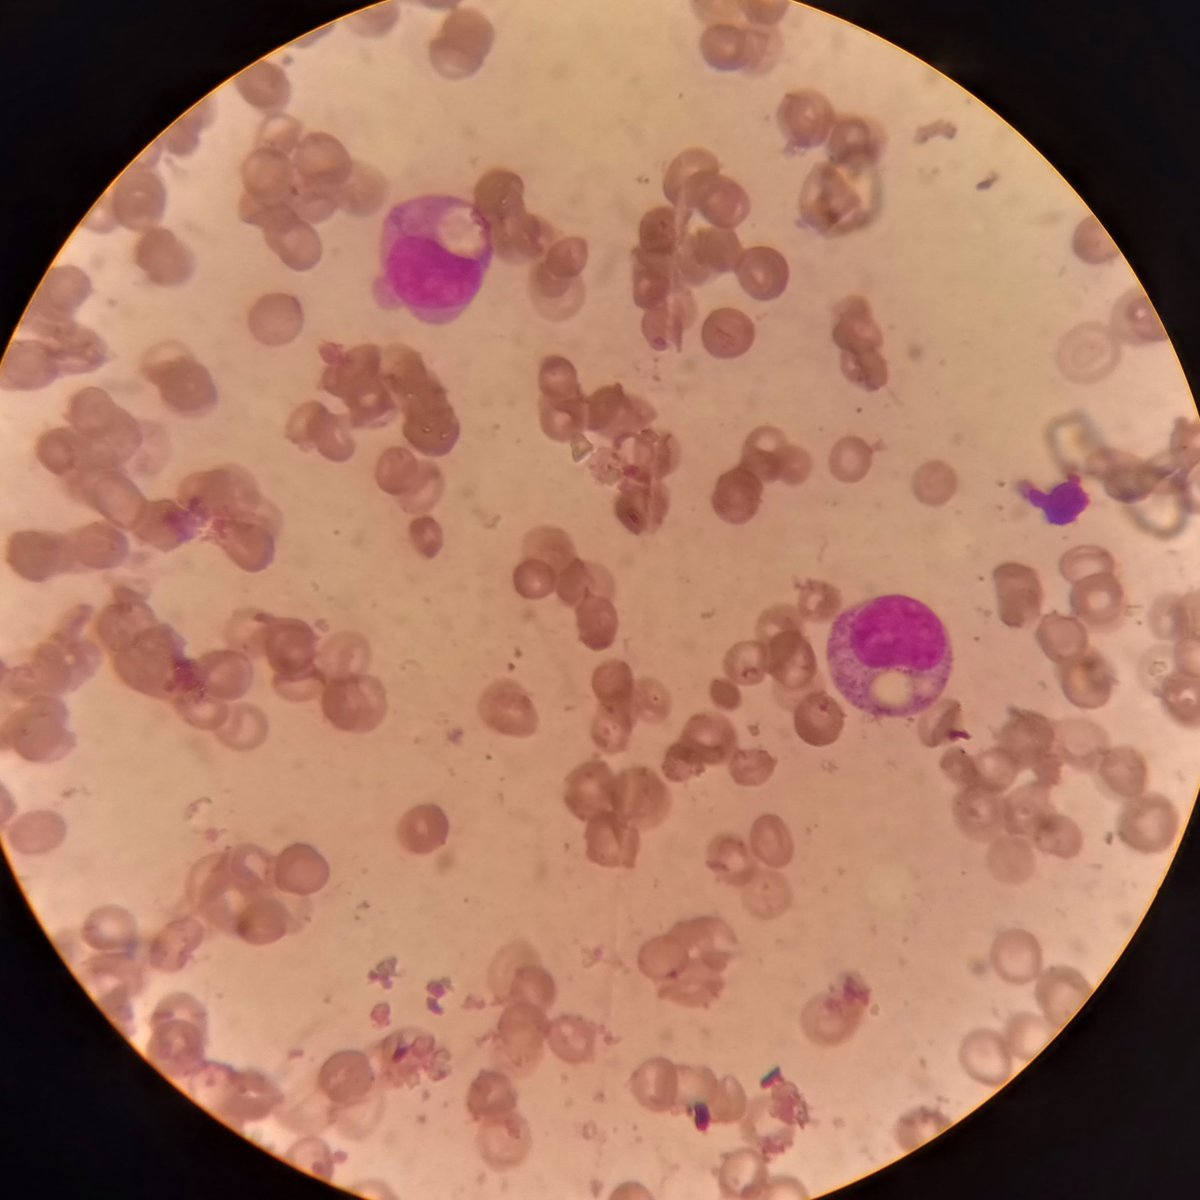 I guess I am lucky to see the second case of chediak higashi during my career. This case is indeed special  with the oncogoing hemophagocytosis (phagocytic vacuole in the myeloid series).